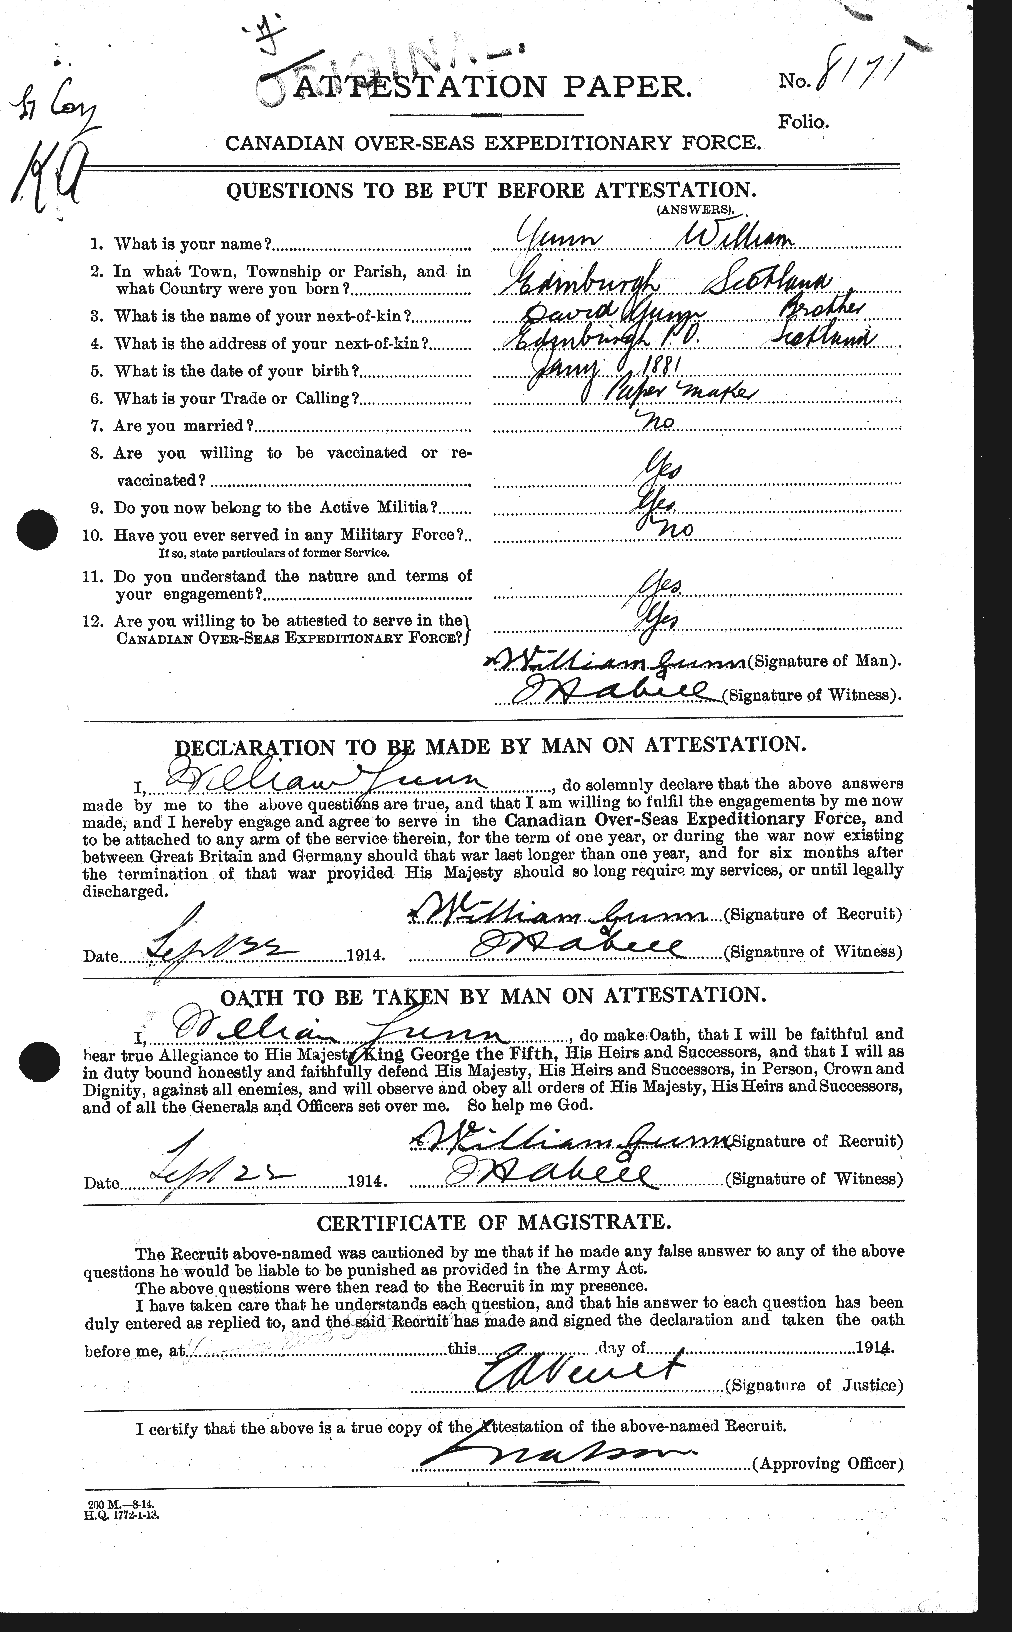 Personnel Records of the First World War - CEF 369354a